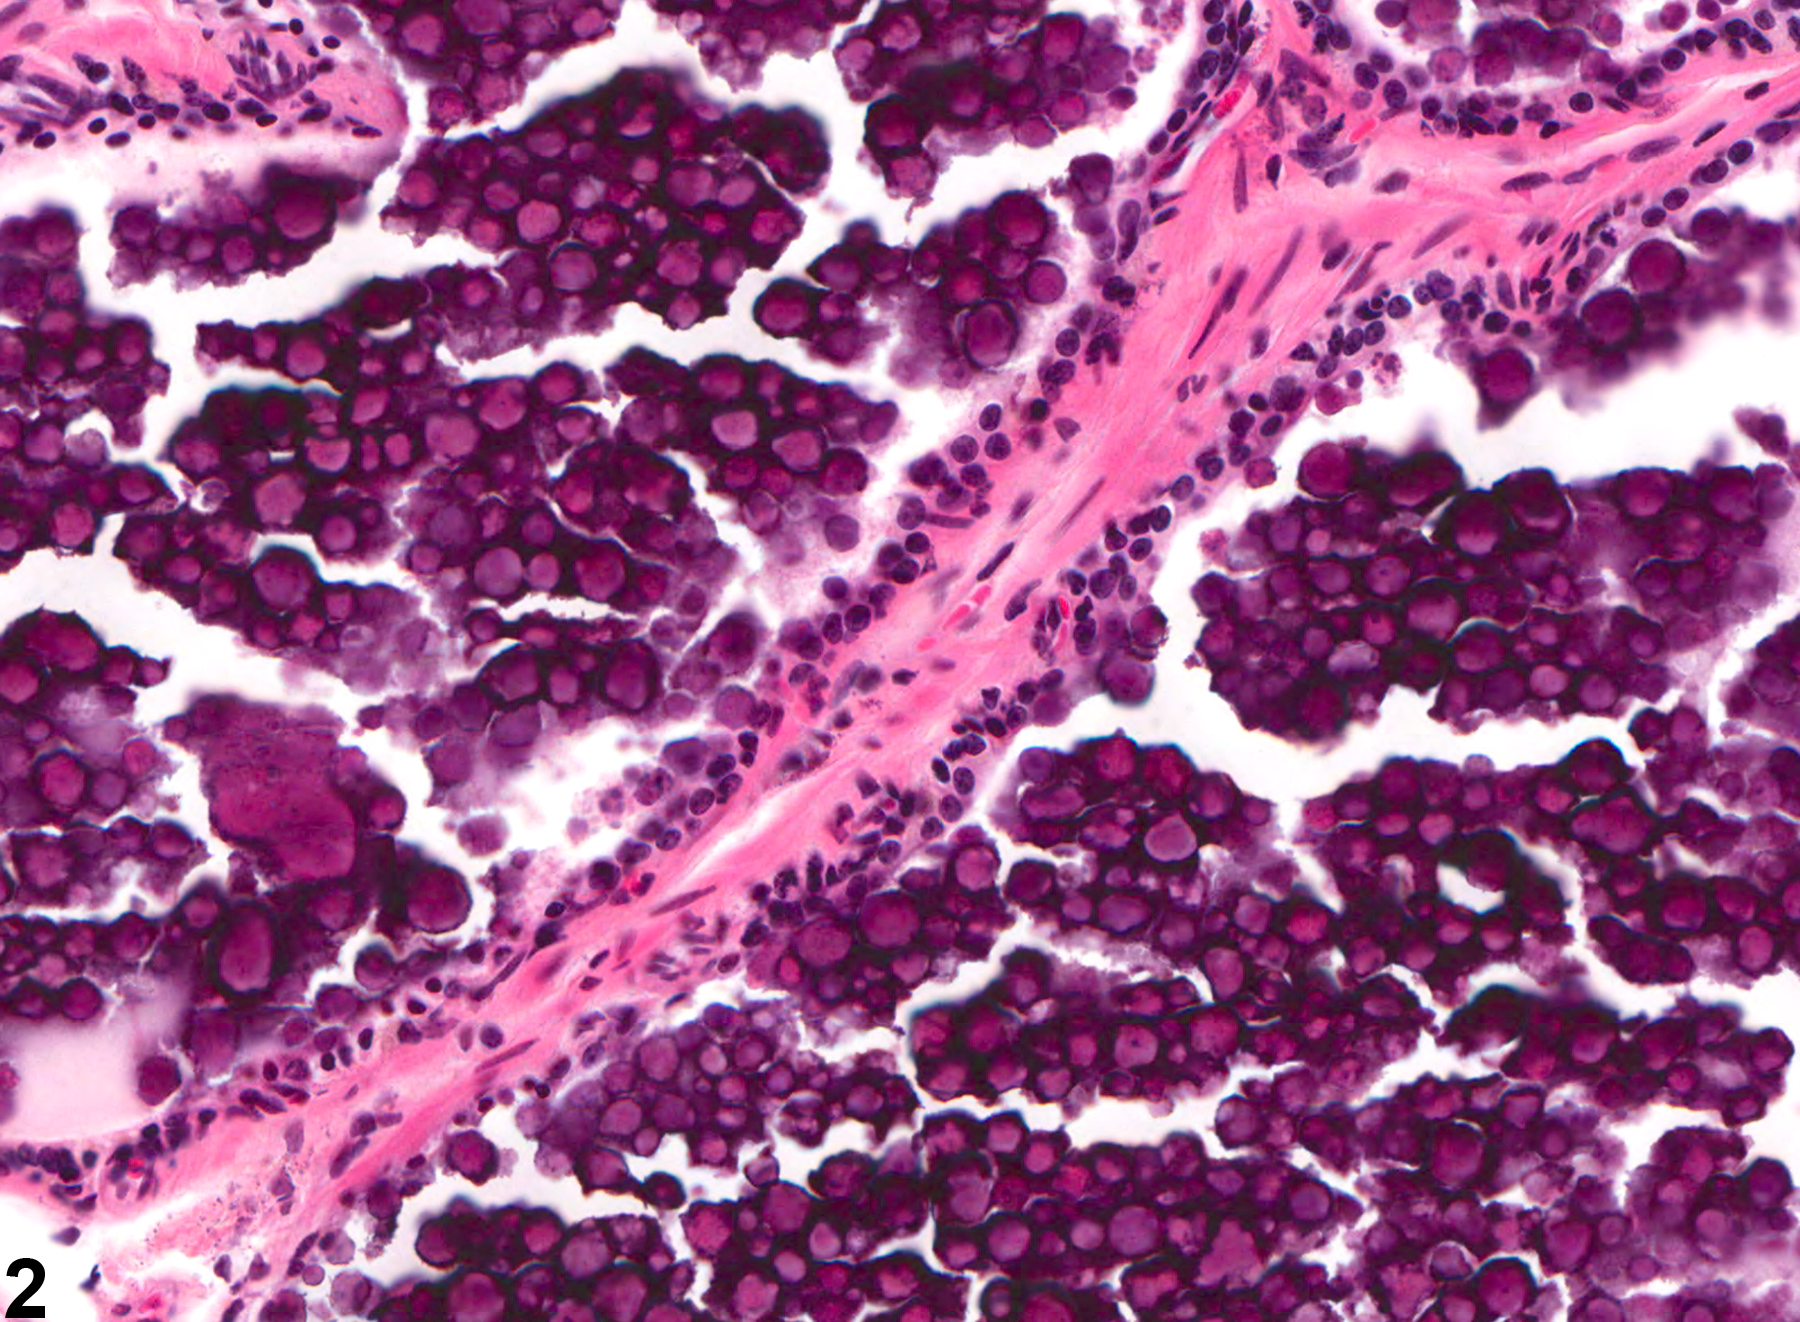 Image of mineralization in the prostate from a male Osborne-Mendel rat in a chronic study